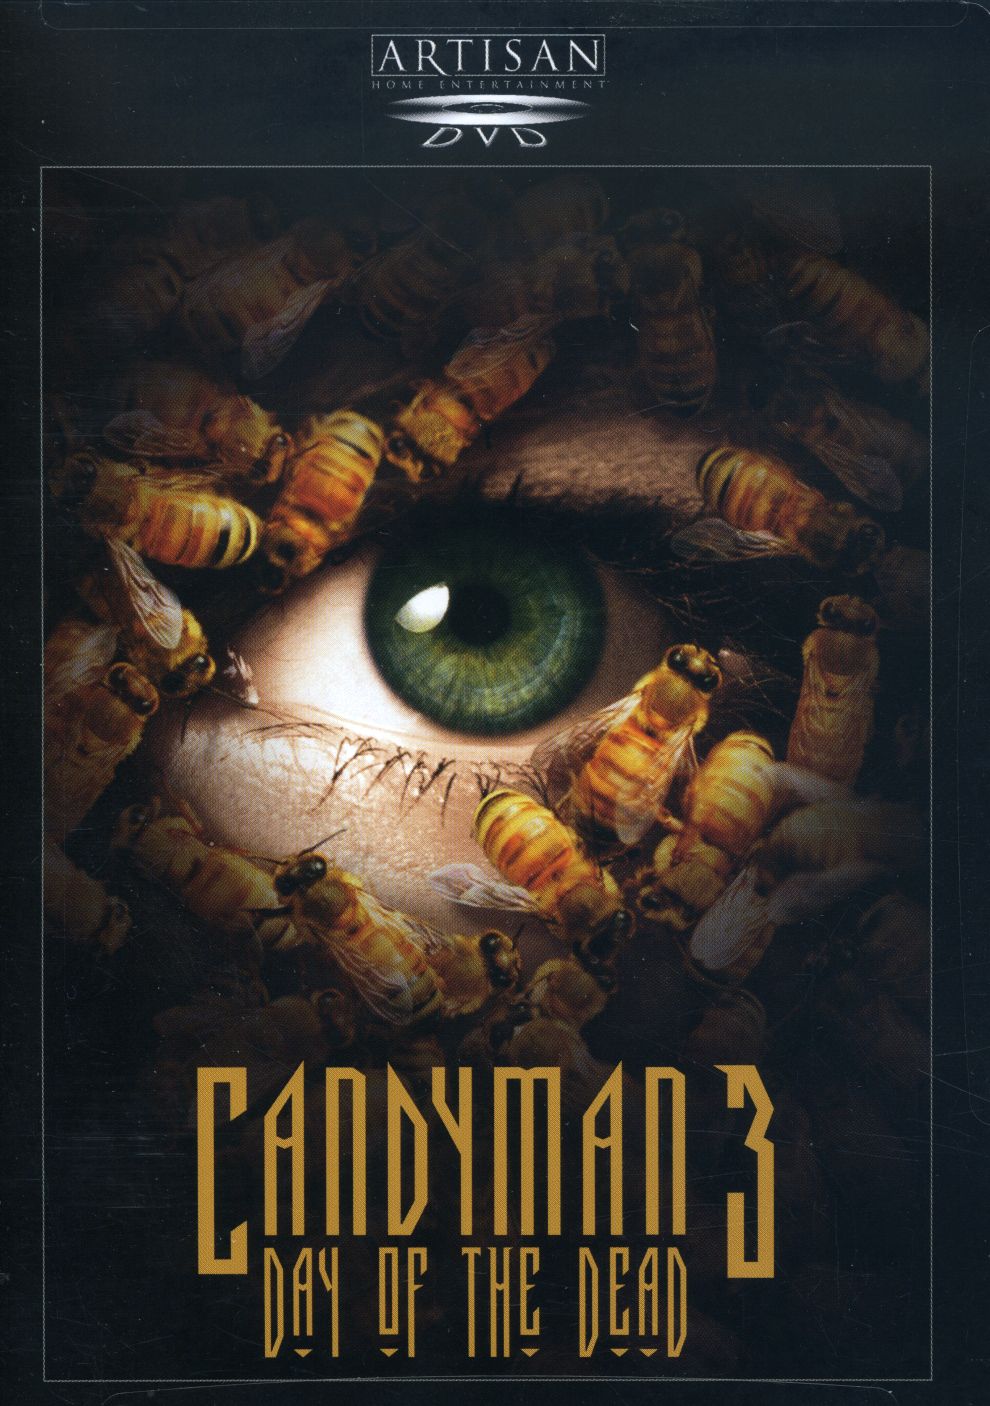 CANDYMAN 3: DAY OF THE DEAD / (WS)